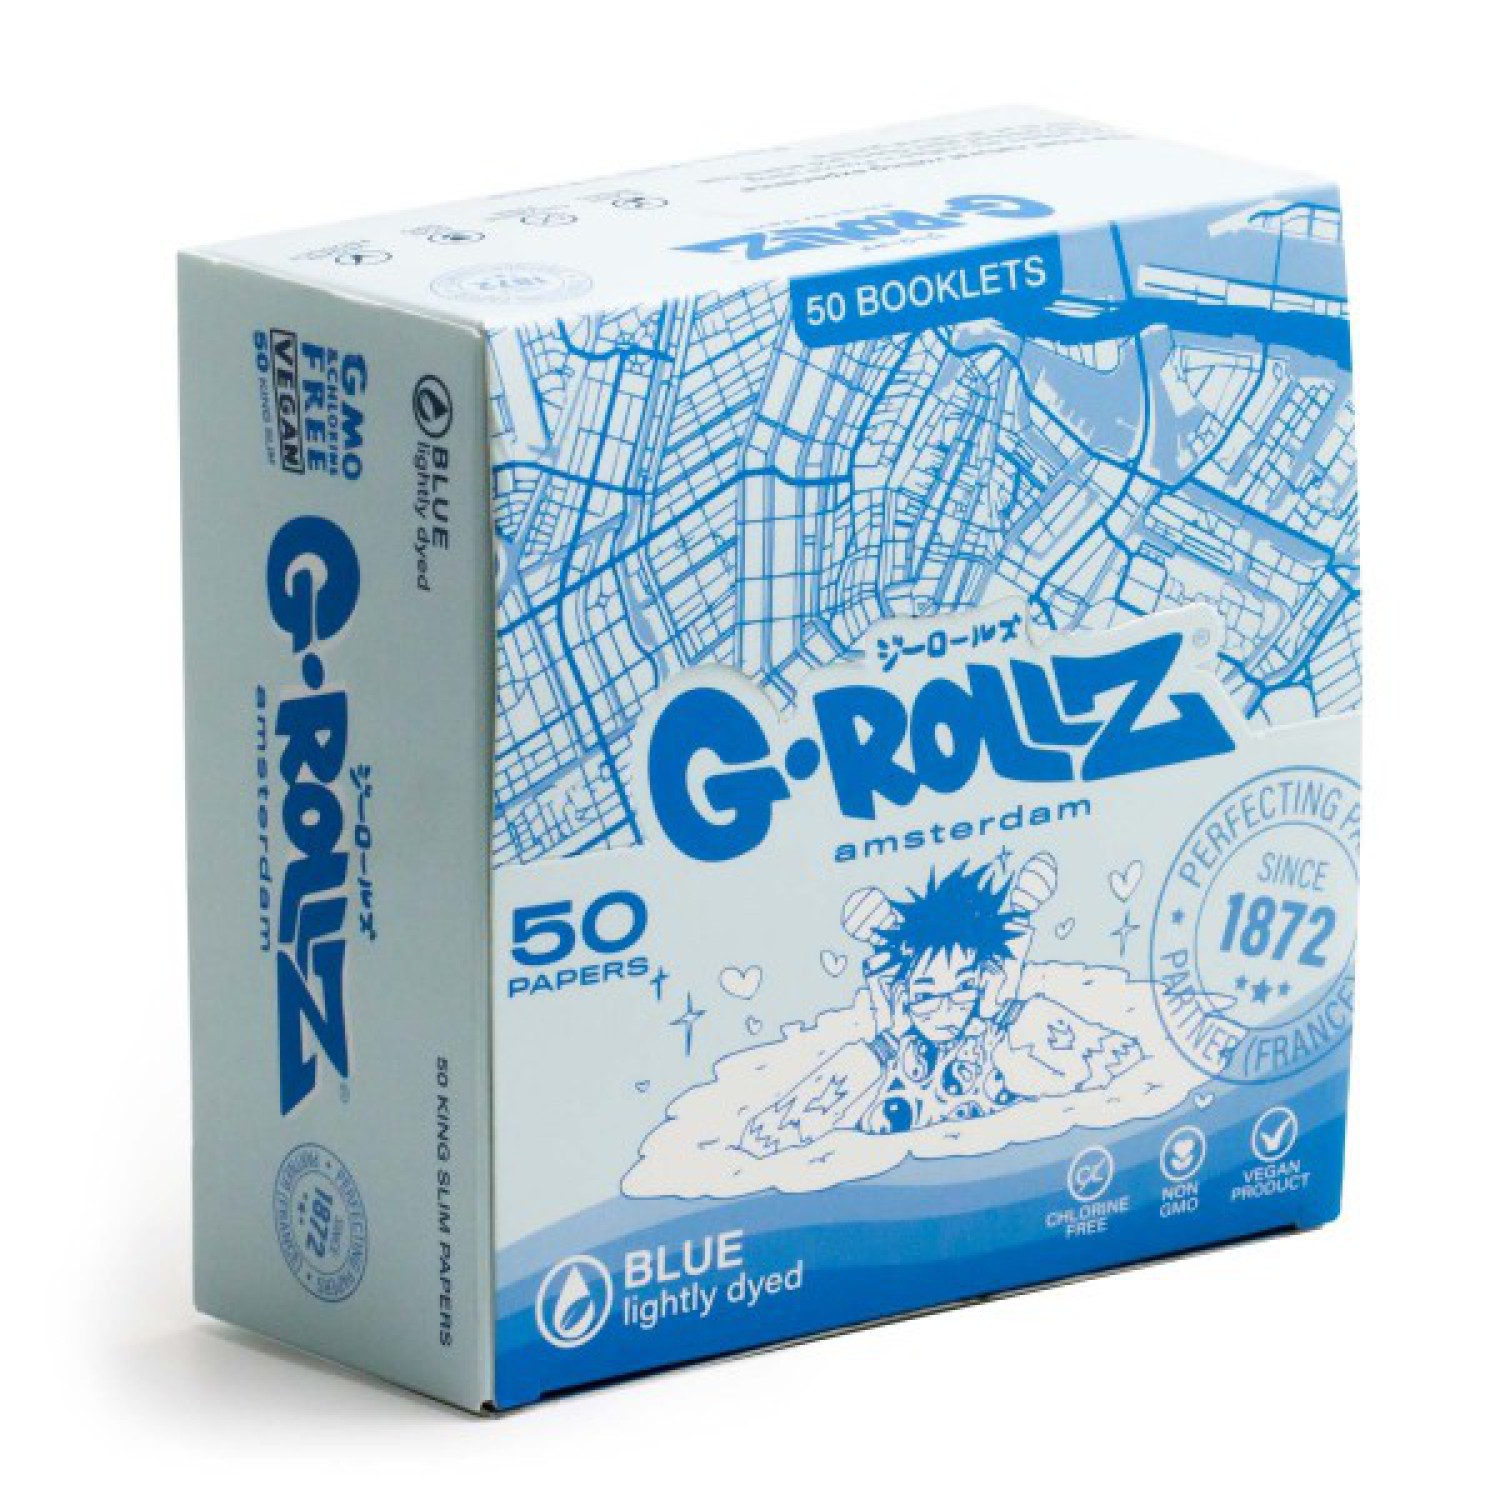 G-ROLLZ | Lightly Dyed Blue - 50 KS Papers (50 Booklets Display)